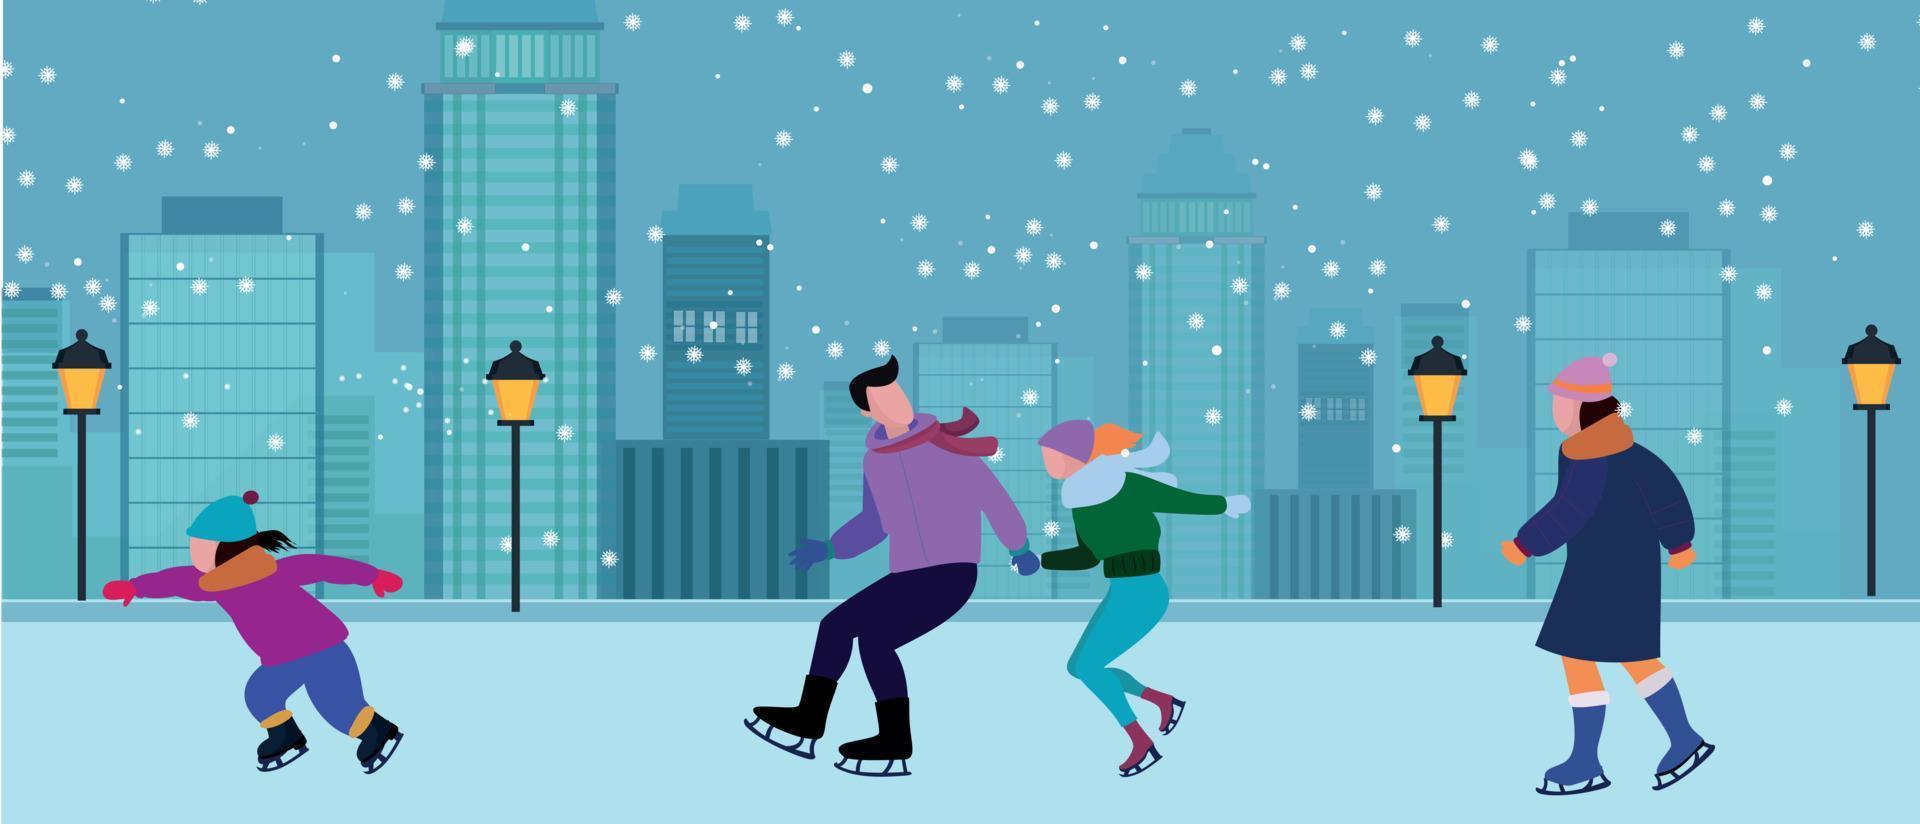 Merry Christmas and Happy New Year. Holiday scene with people characters skating on outdoor ice rink together. Vector illustration.